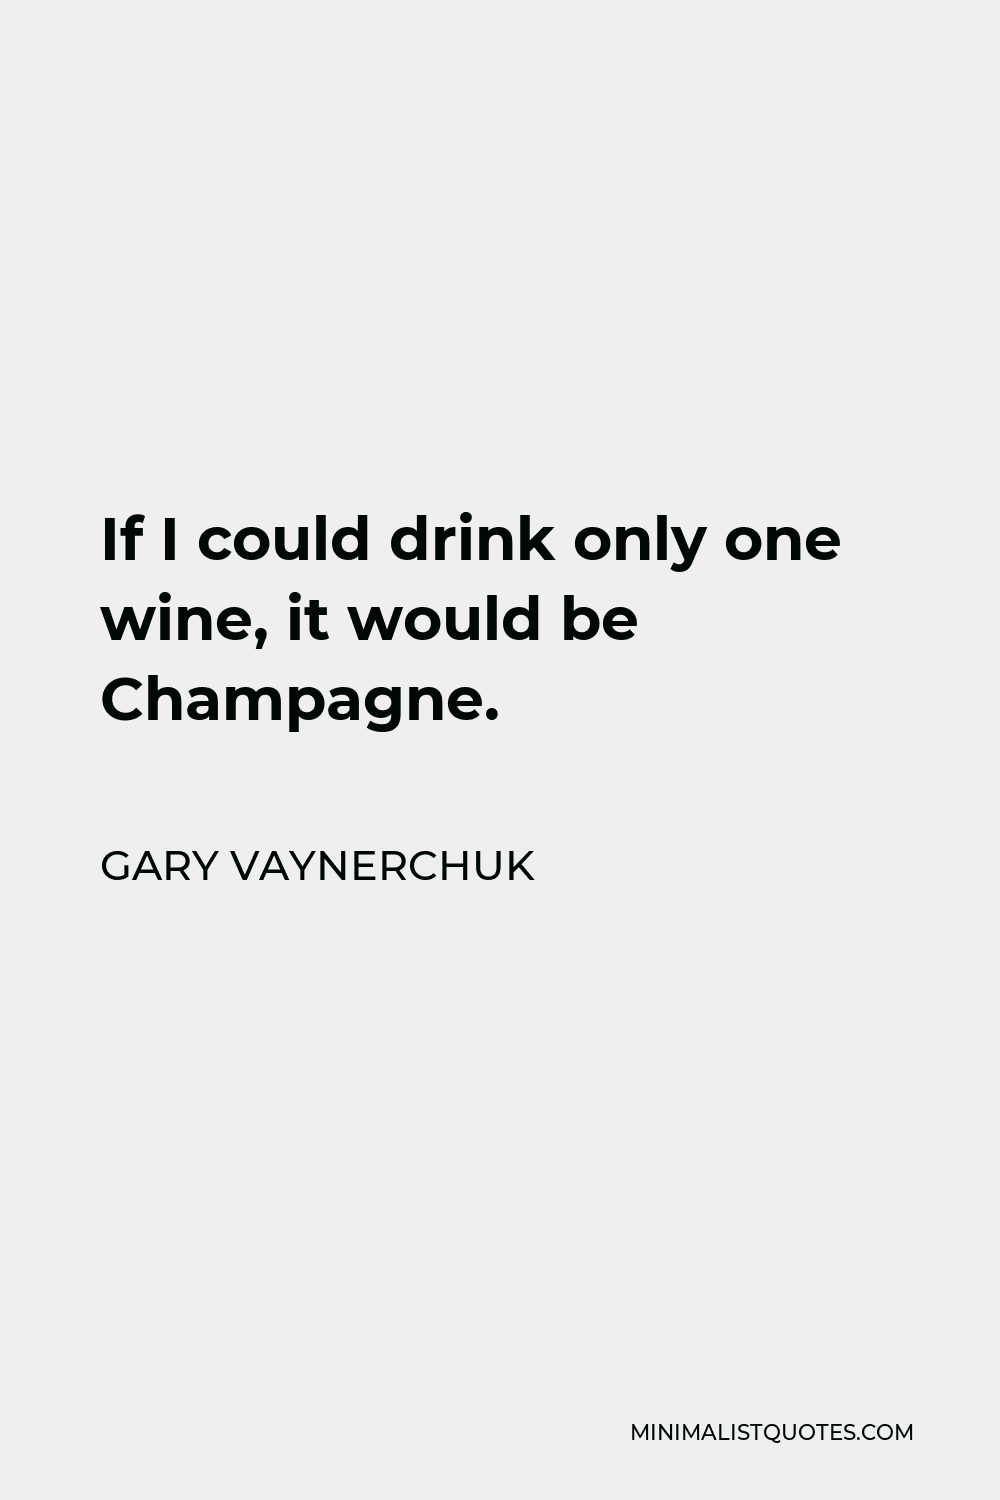 Gary Vaynerchuk Quote - If I could drink only one wine, it would be Champagne.